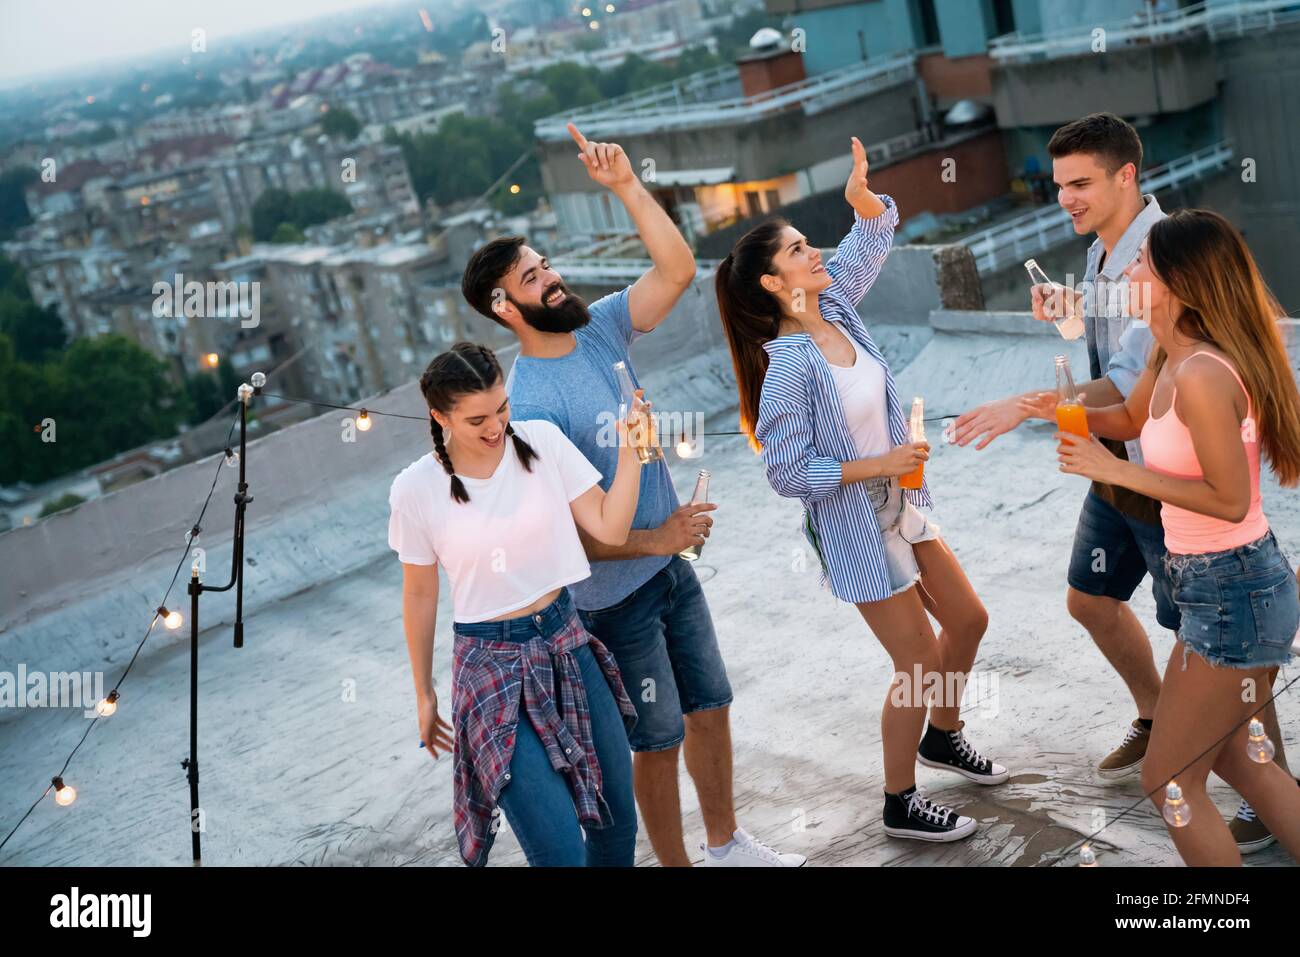 Friends enjoying cocktails at a party. Group of happy people having fun, dancing on a rooftop Stock Photo